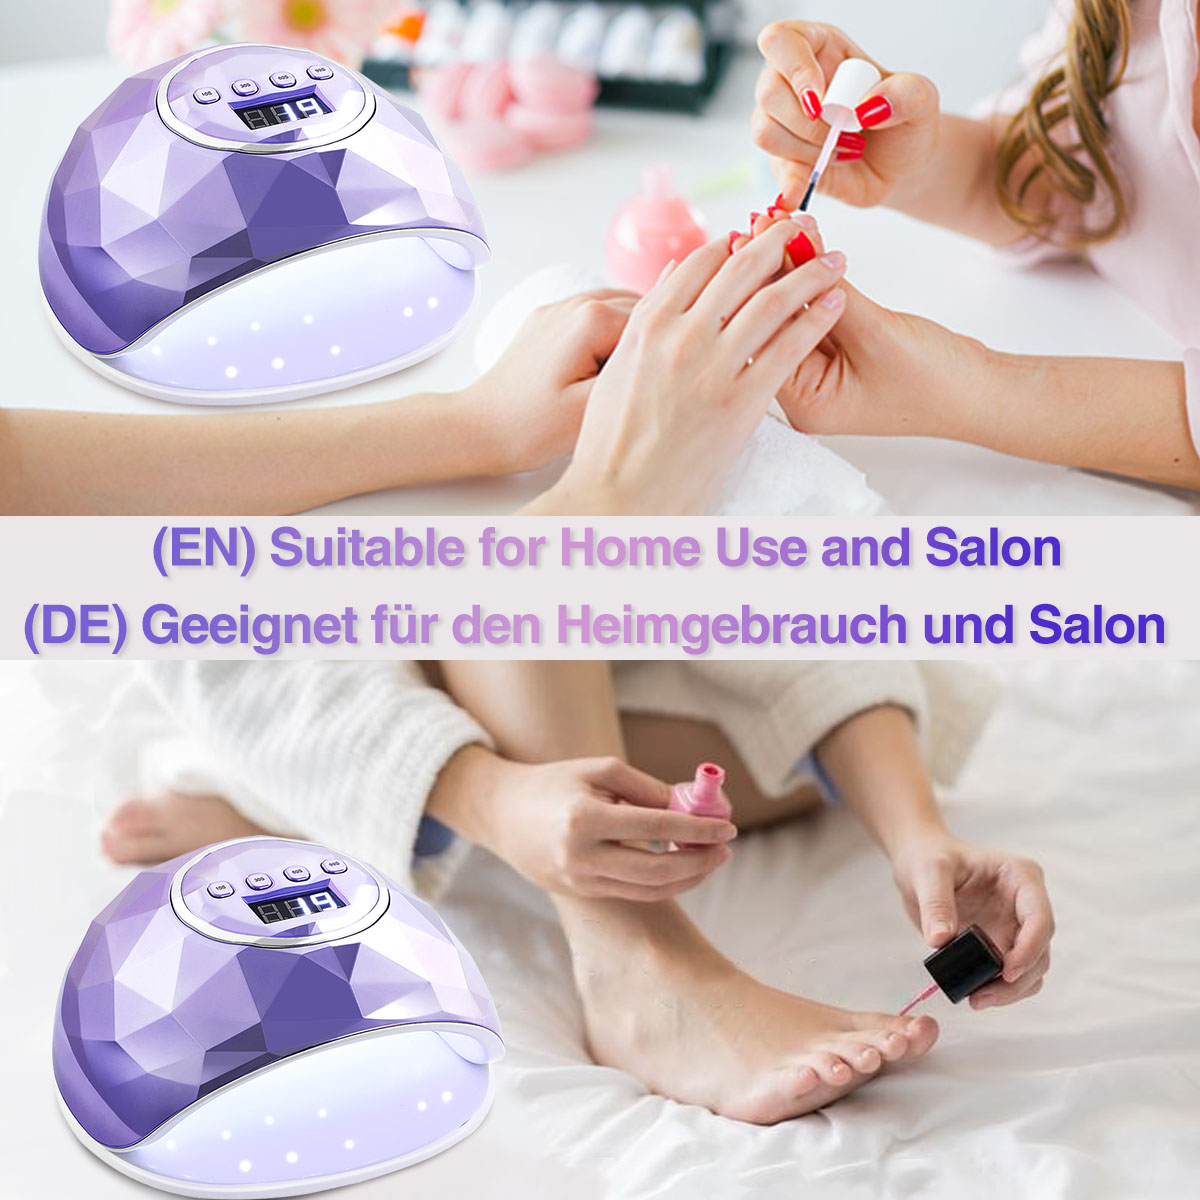 86W-UV-LED-Nail-Lamp-Automatic-Curing-Nail-Dryer-LCD-Display-Manicure-Pedicure-Tools-1844147-3